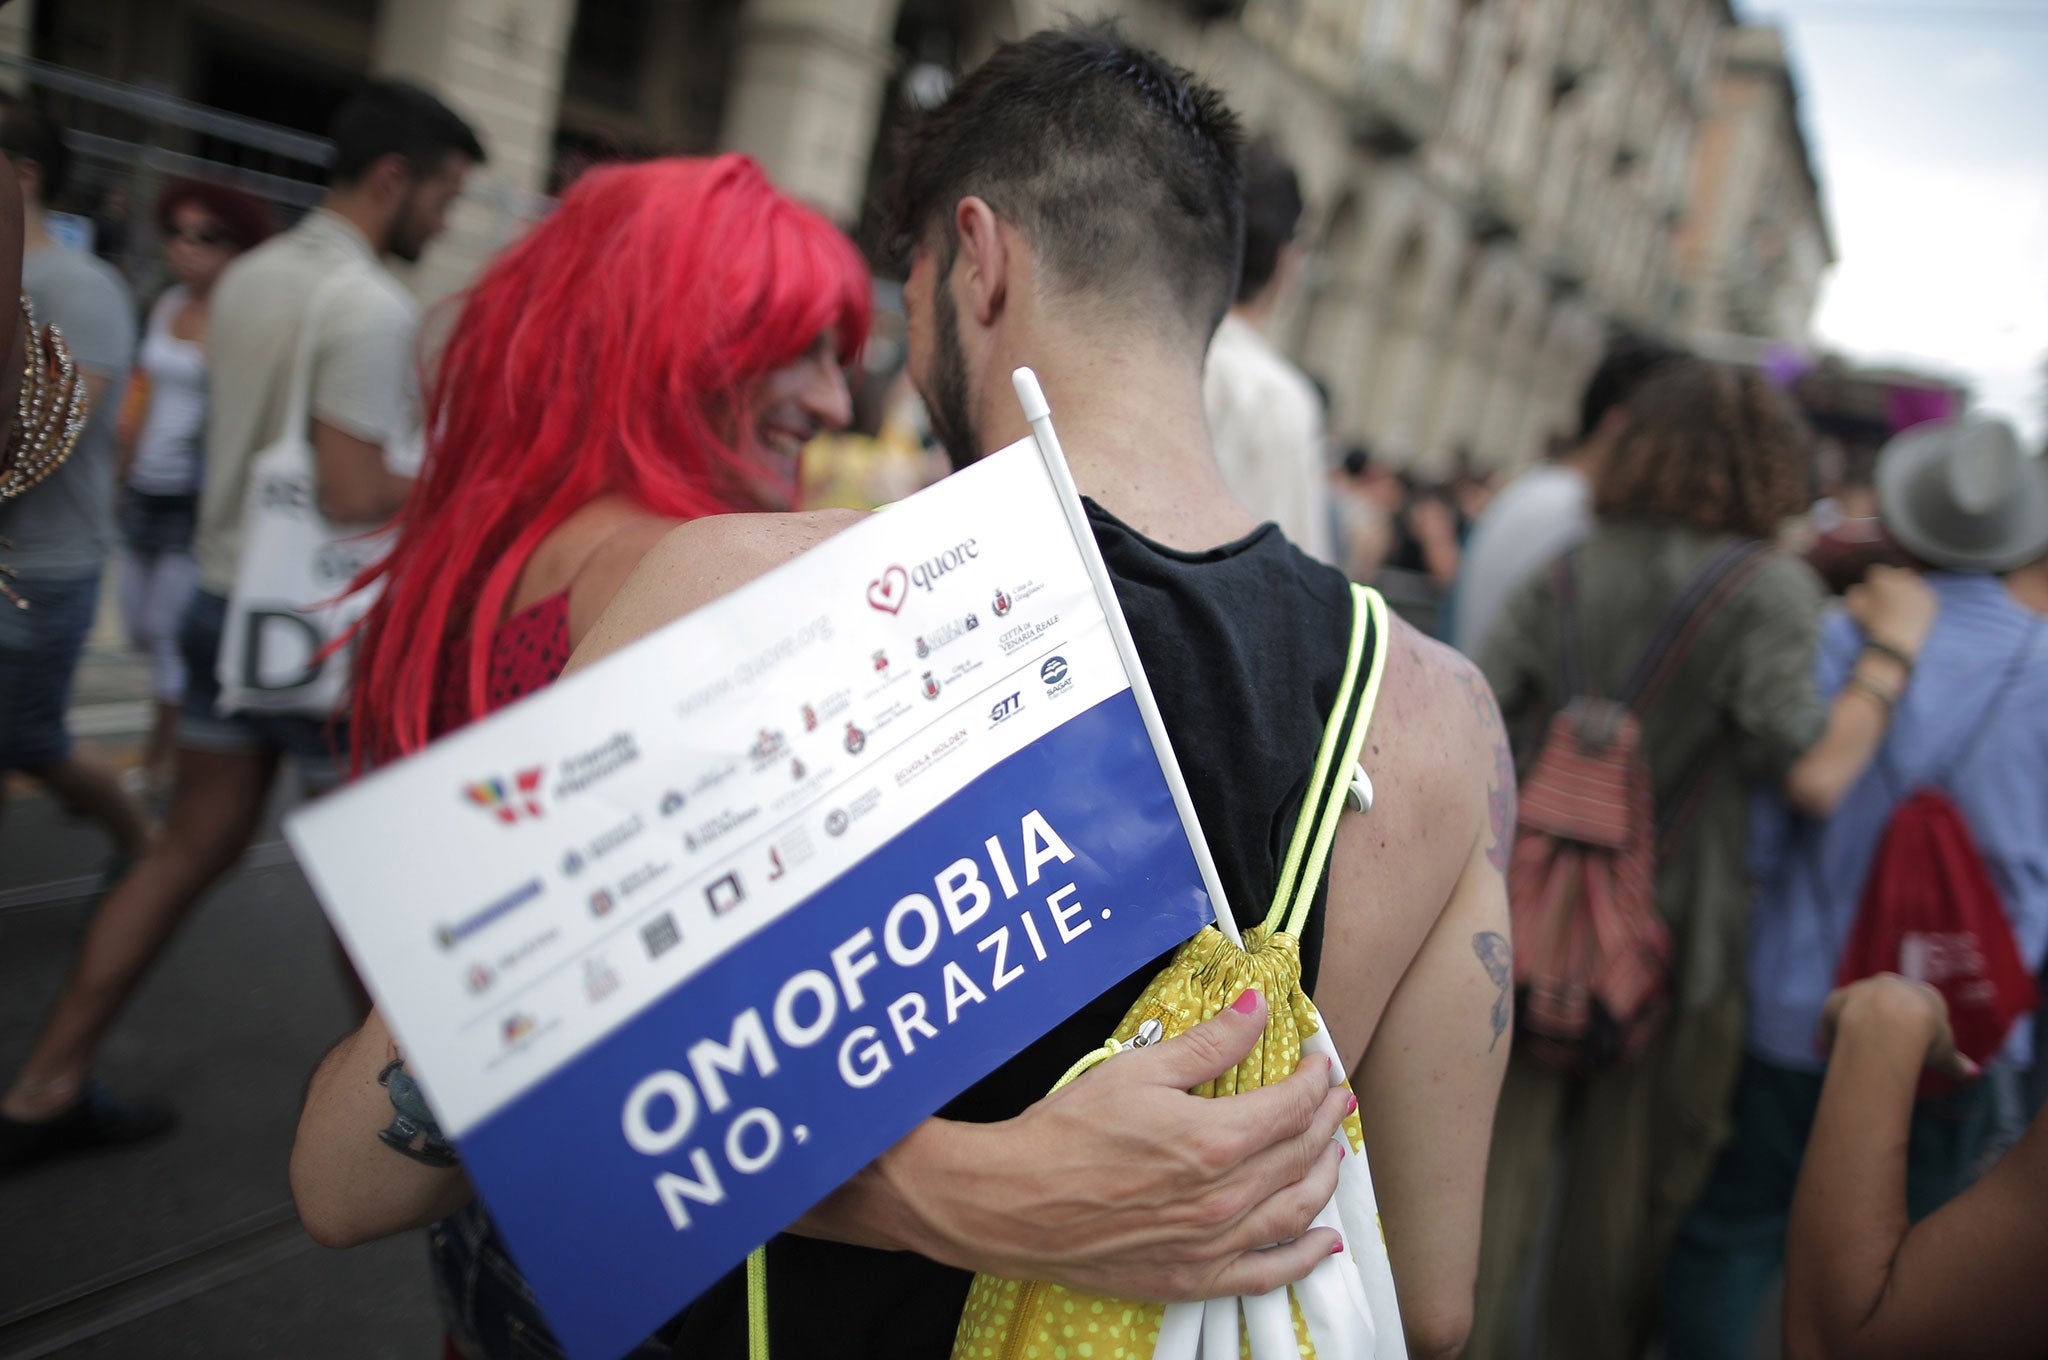 People march during the annual Lesbian, Gay, Bisexual and Transgender (LGBT) Pride Parade in Turin